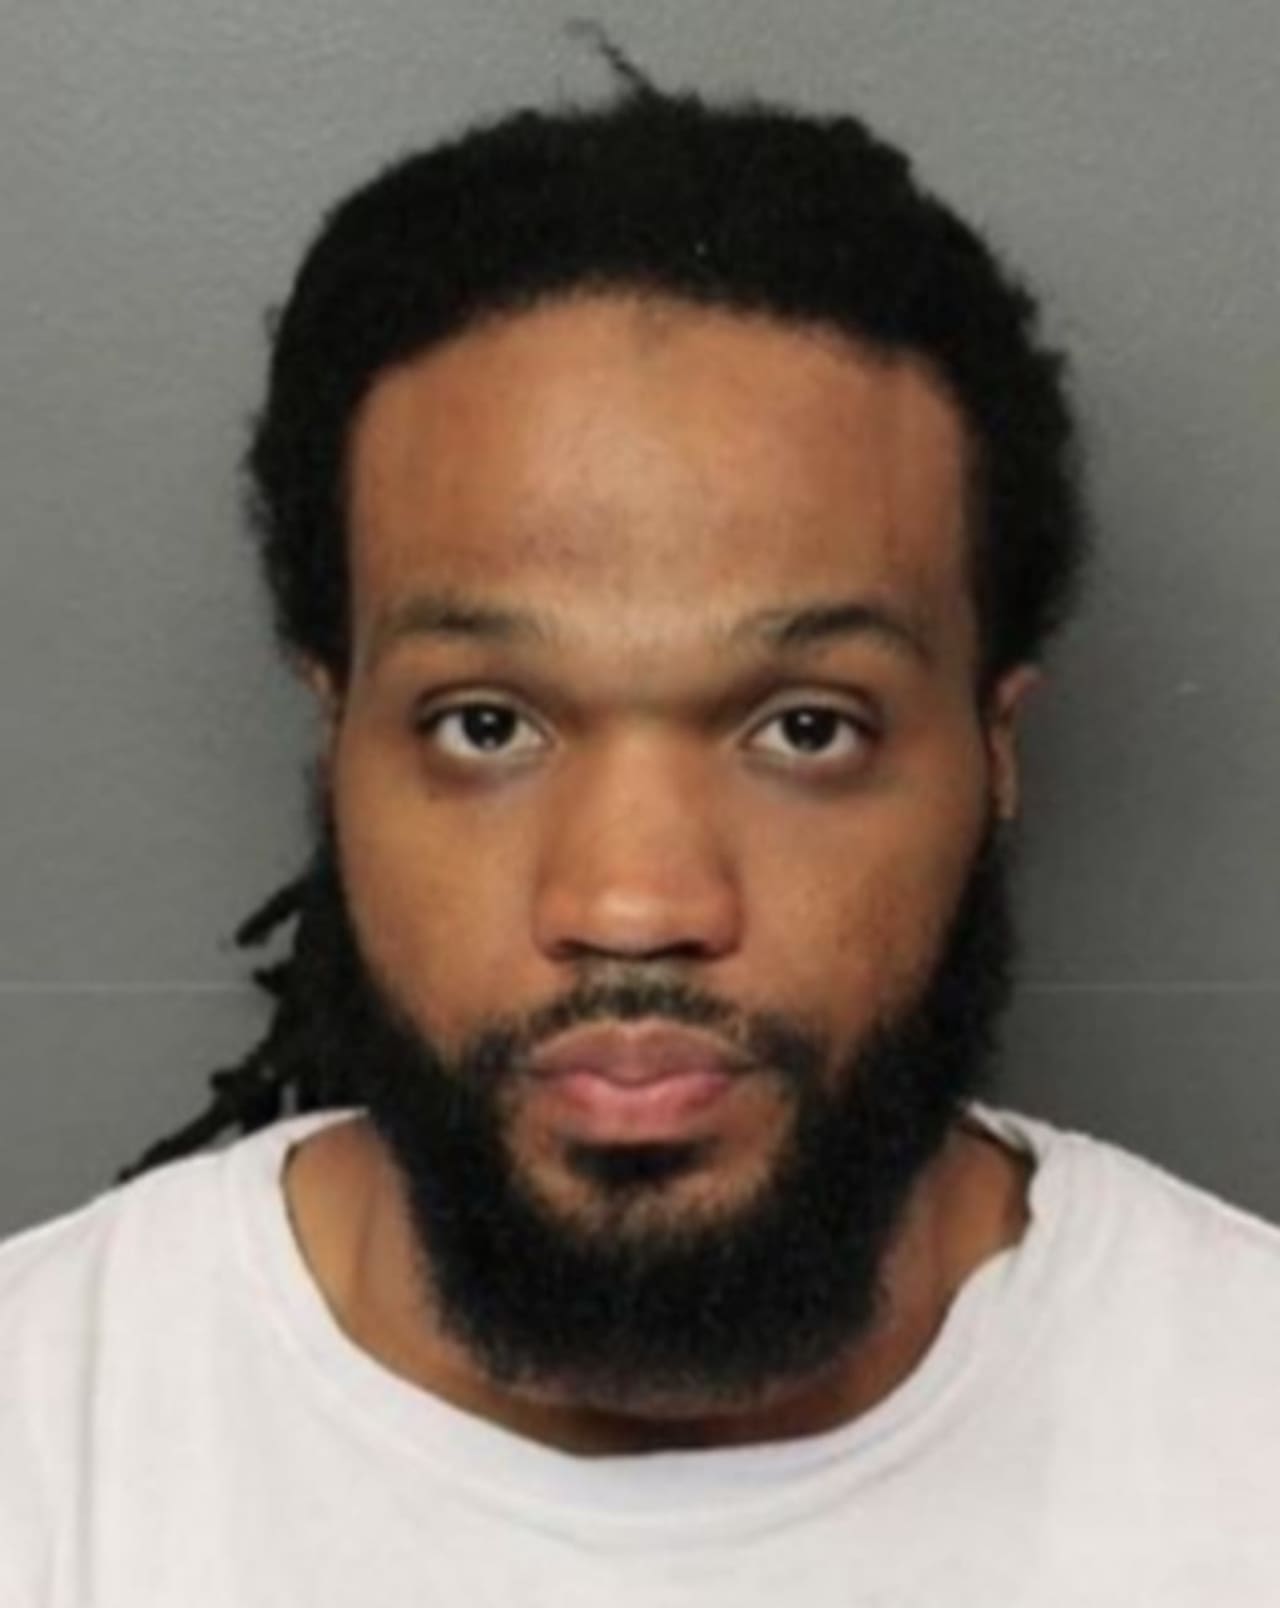 A warrant has been issued for the arrest of Daquan Ragland, 29, who police say fired a gun near the area of 93-95 Clinton Pl. in Newark on Wednesday, April 15 around 4:20 p.m.